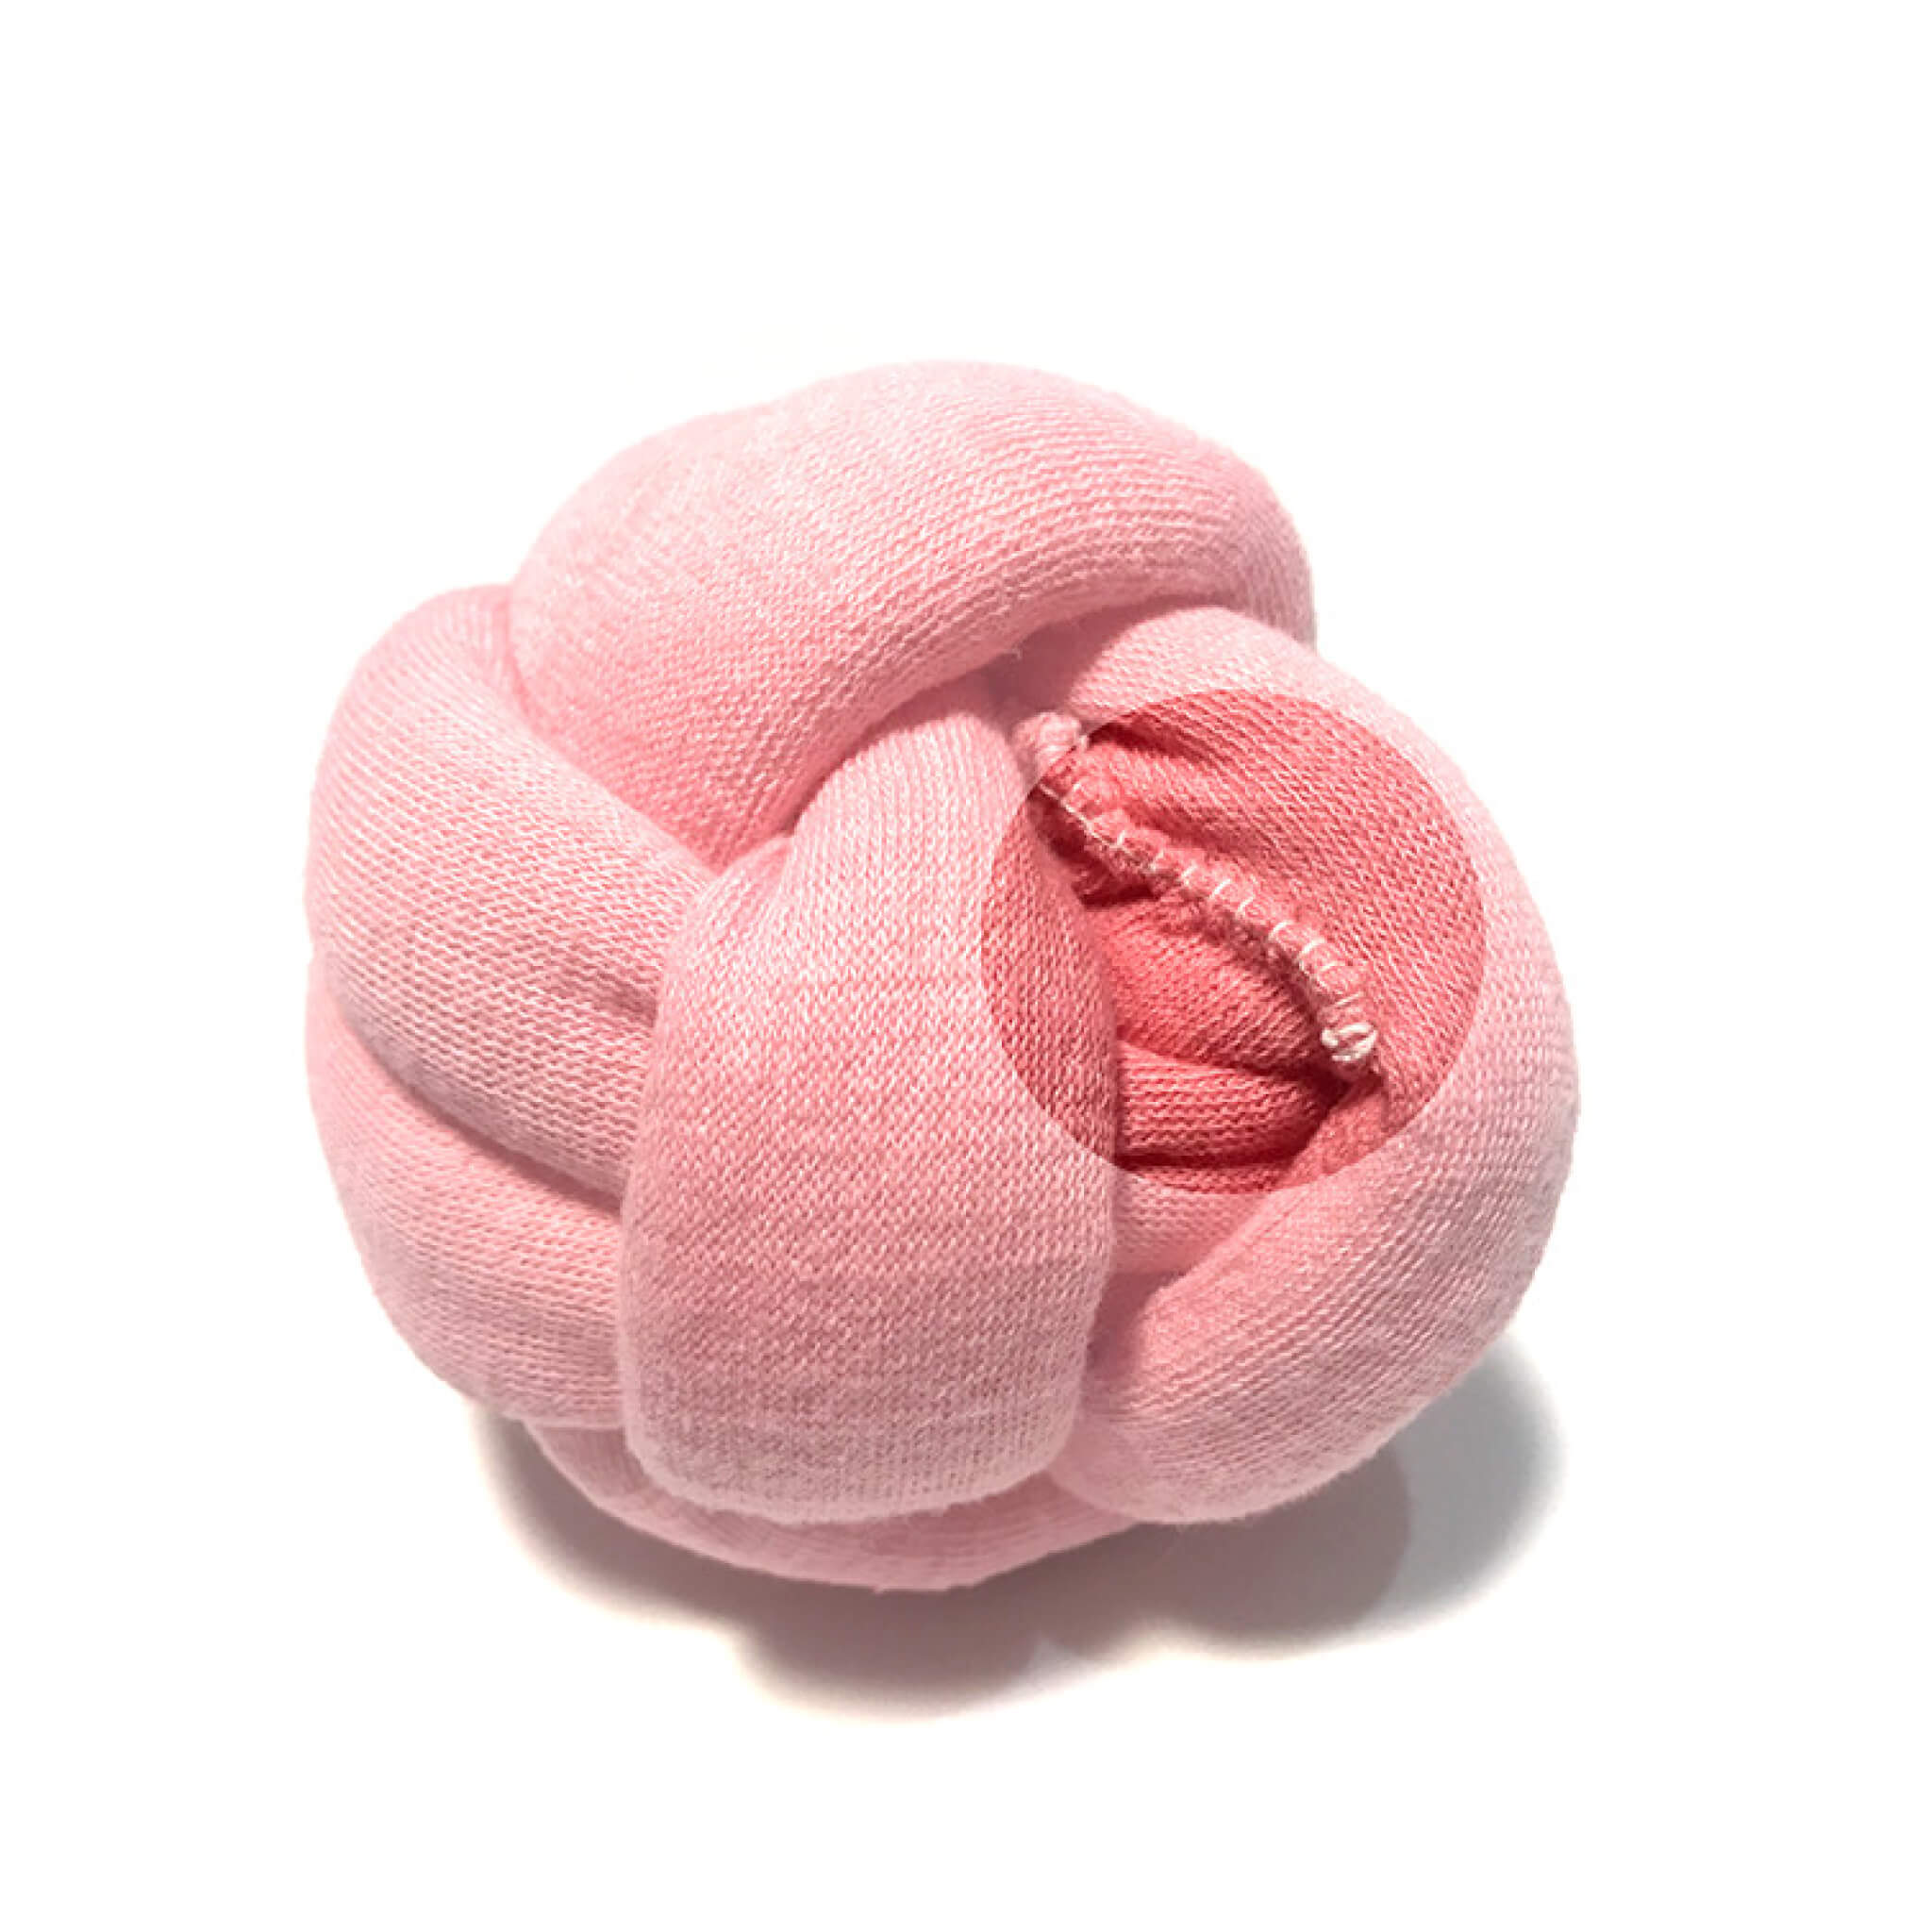 Stitching of pink knotted ball toy.